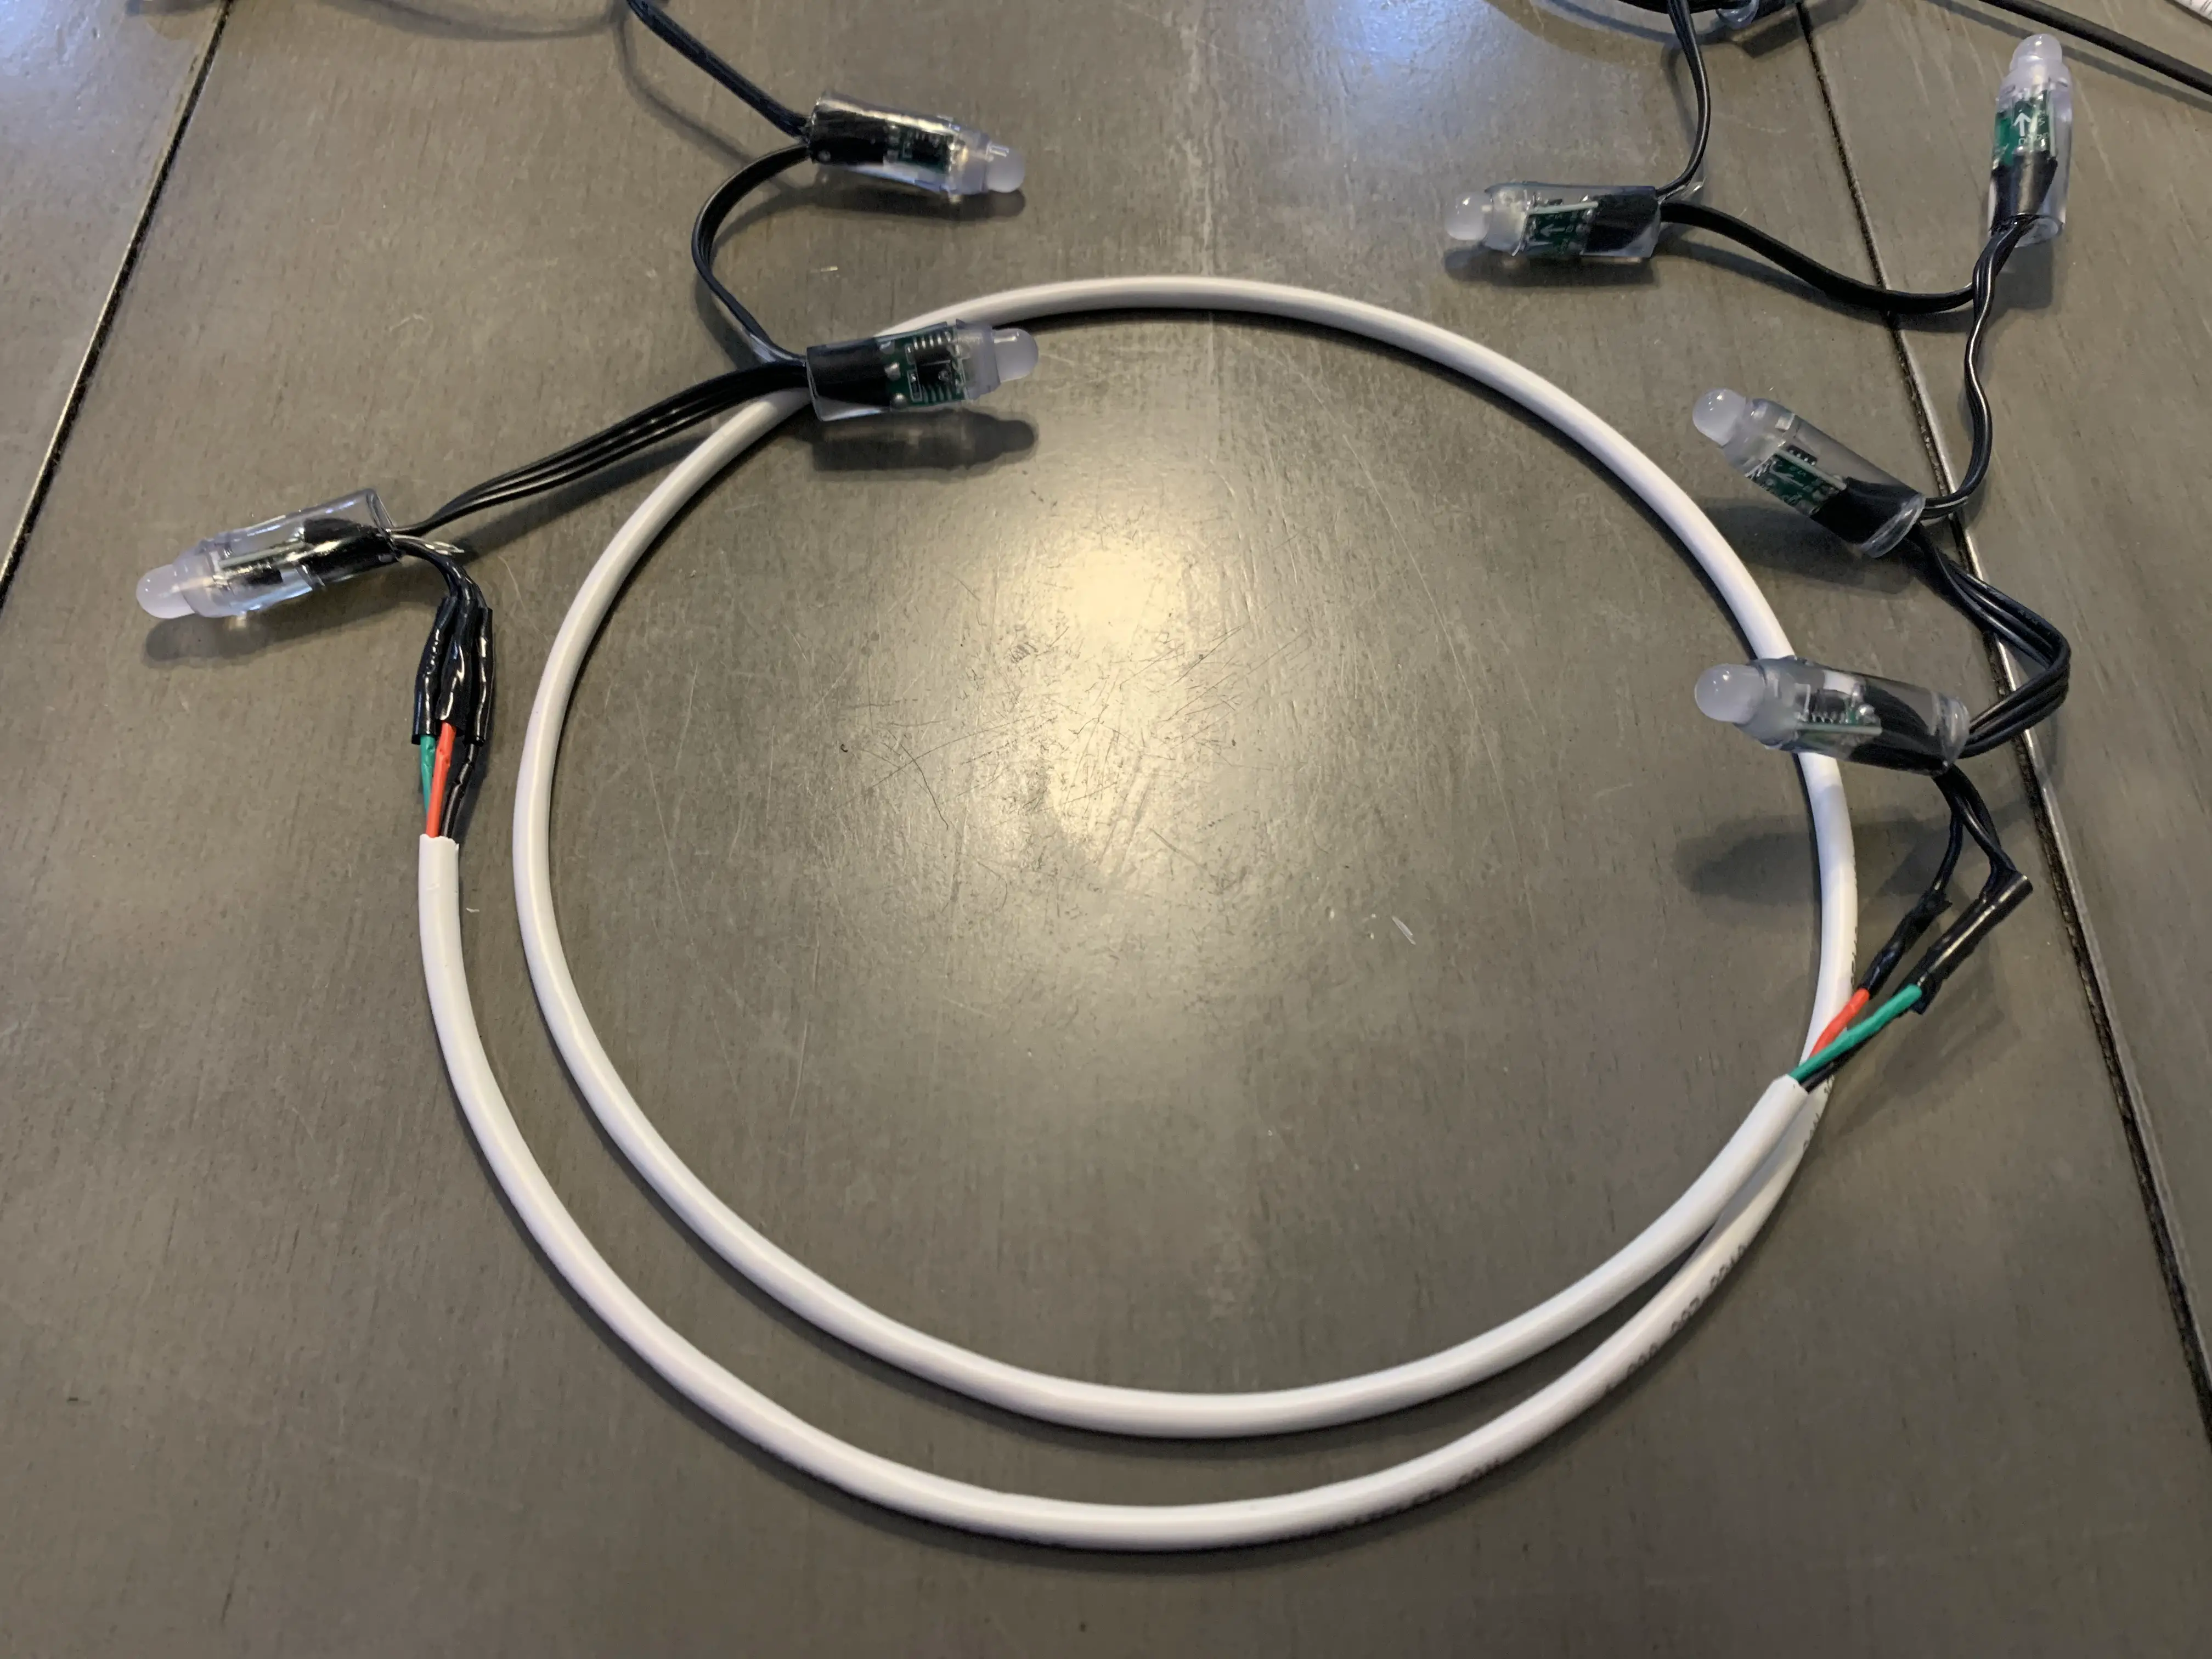 Two strings of LEDs soldered together with 3 wire cable